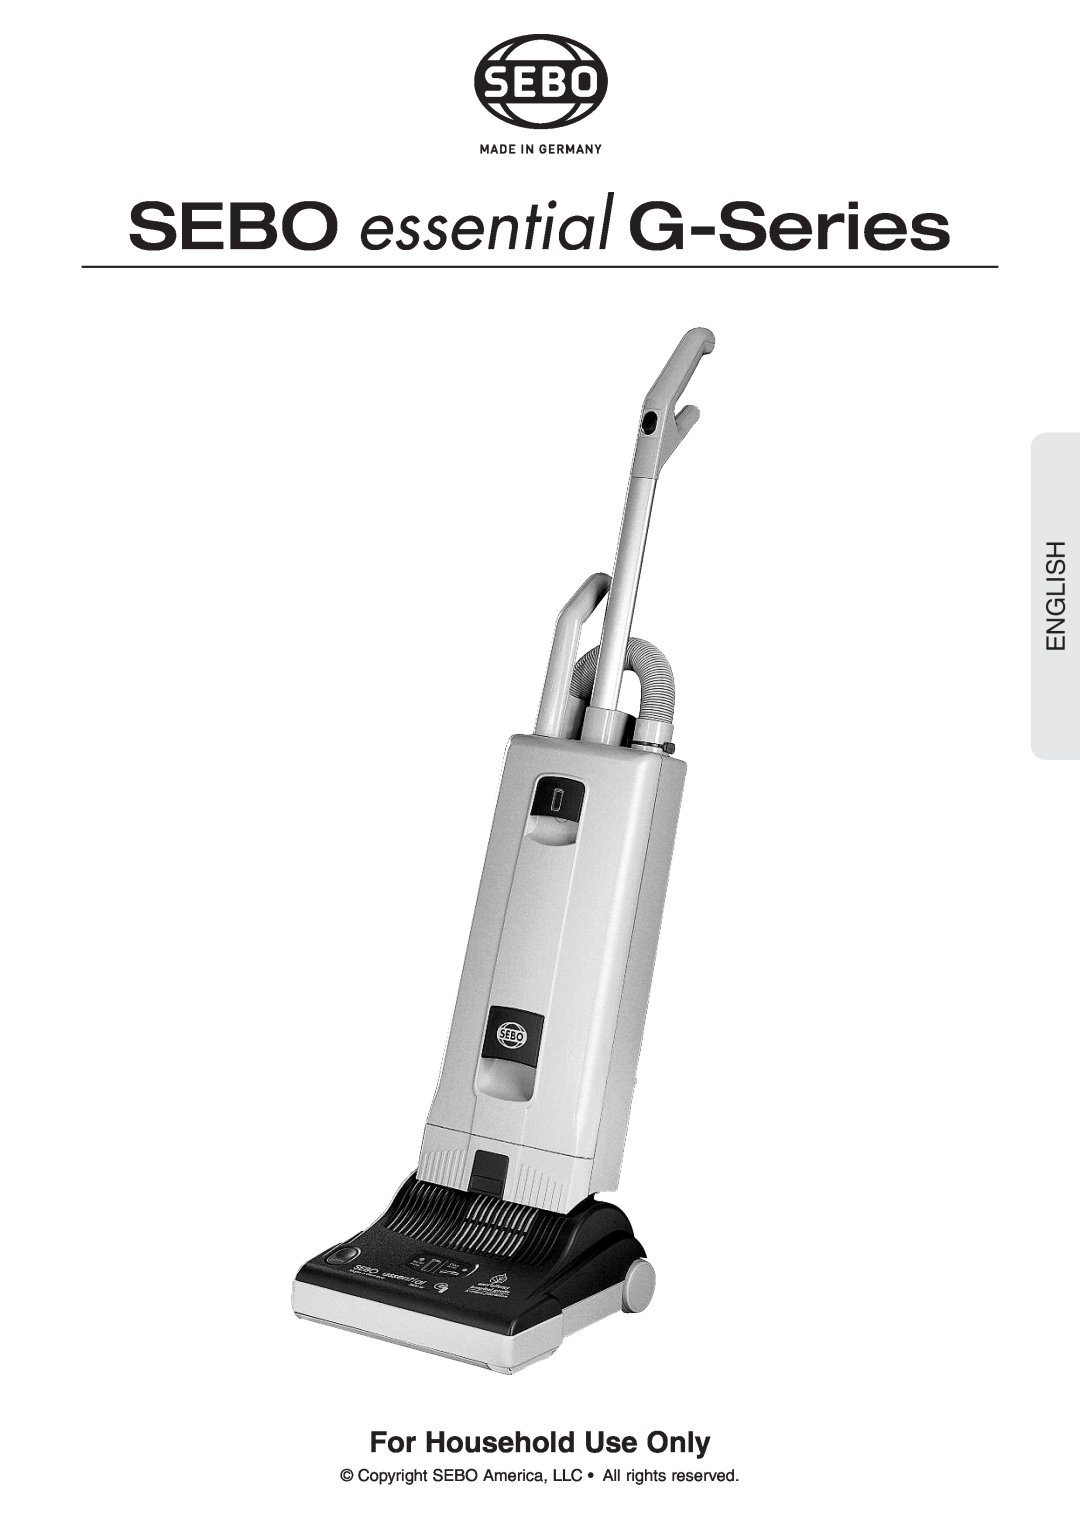 Sebo G-SERIES manual For Household Use Only, SEBO essential G-Series, English 